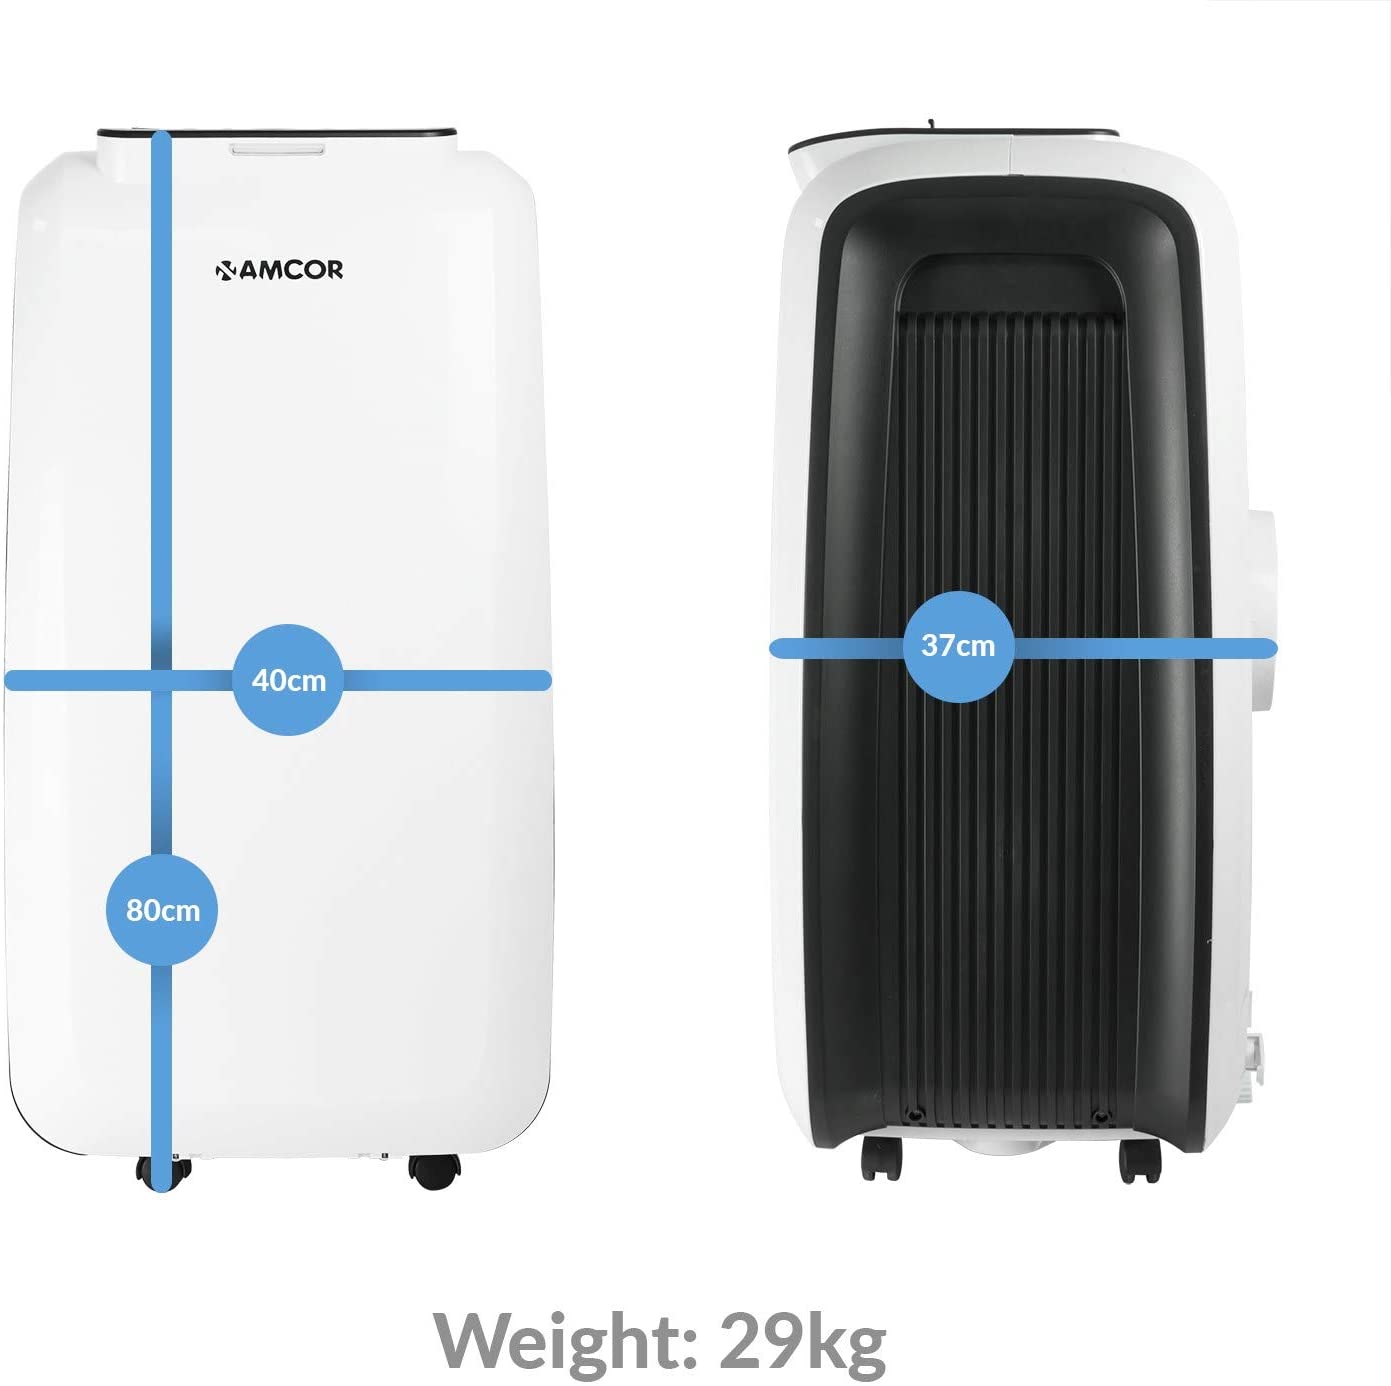 Amcor AC12HP, Portable Air conditioner Reviews and Comments